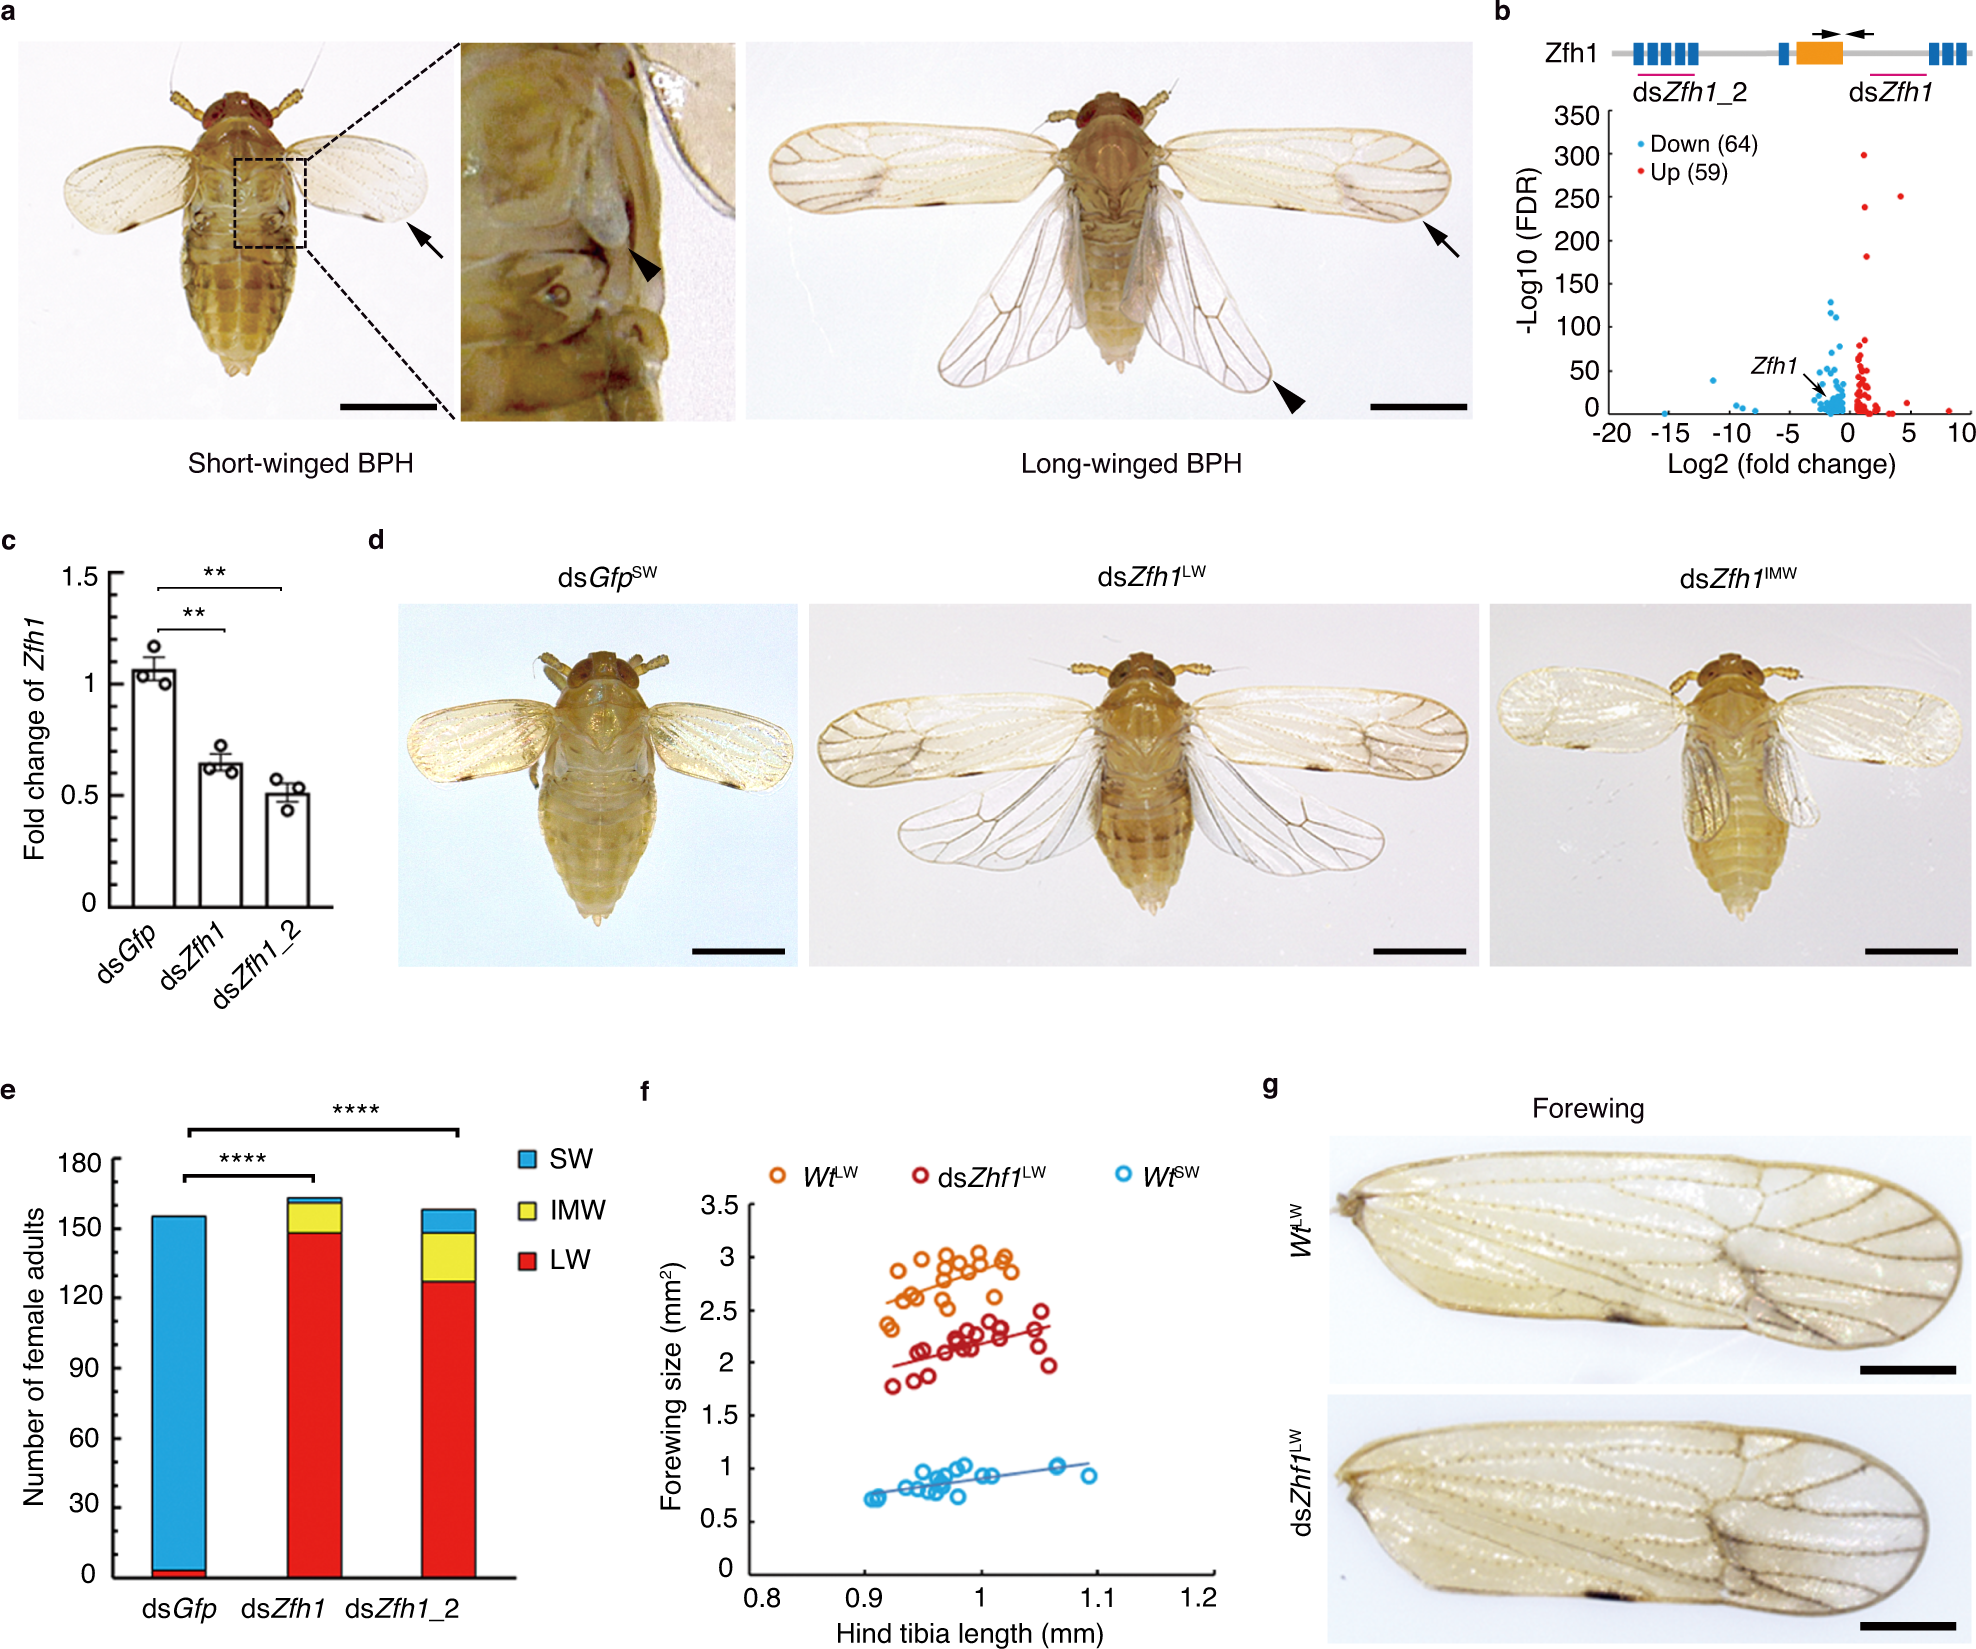 The transcription factor Zfh1 acts as a wing-morph switch in planthoppers